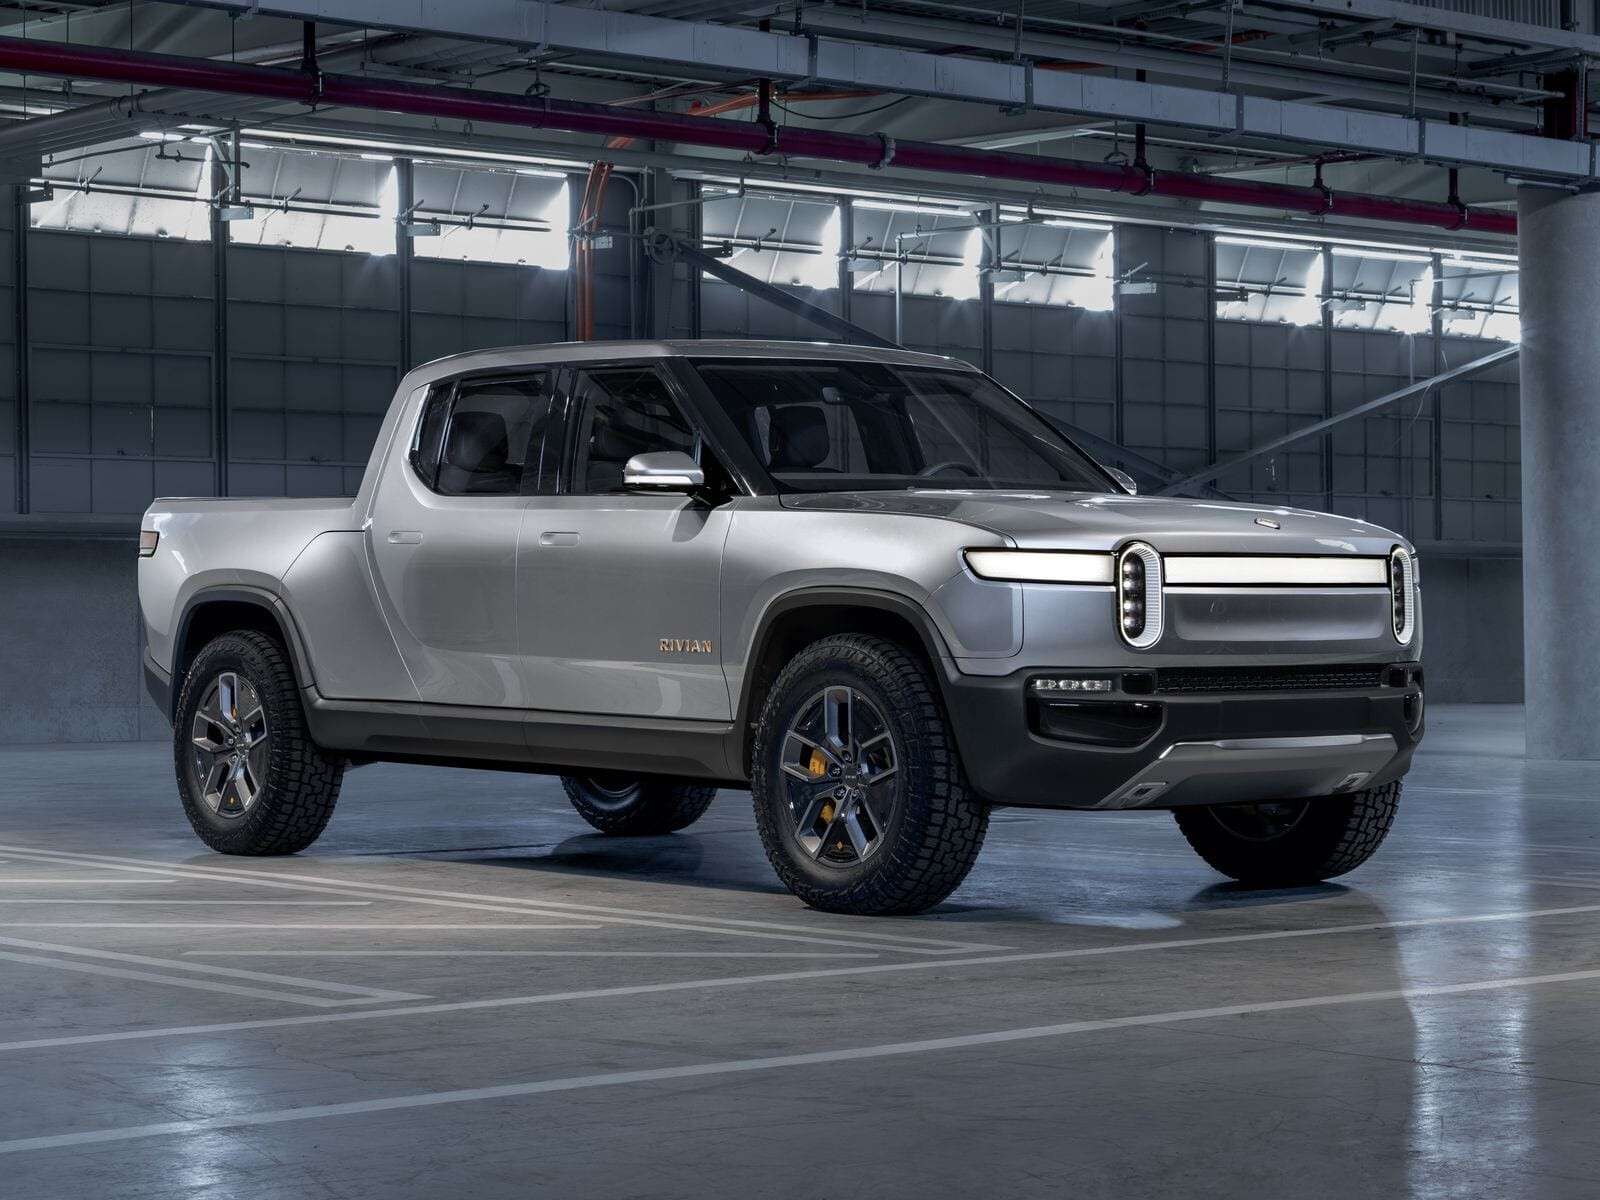 2018-11-a-rivian-r1t-front-view